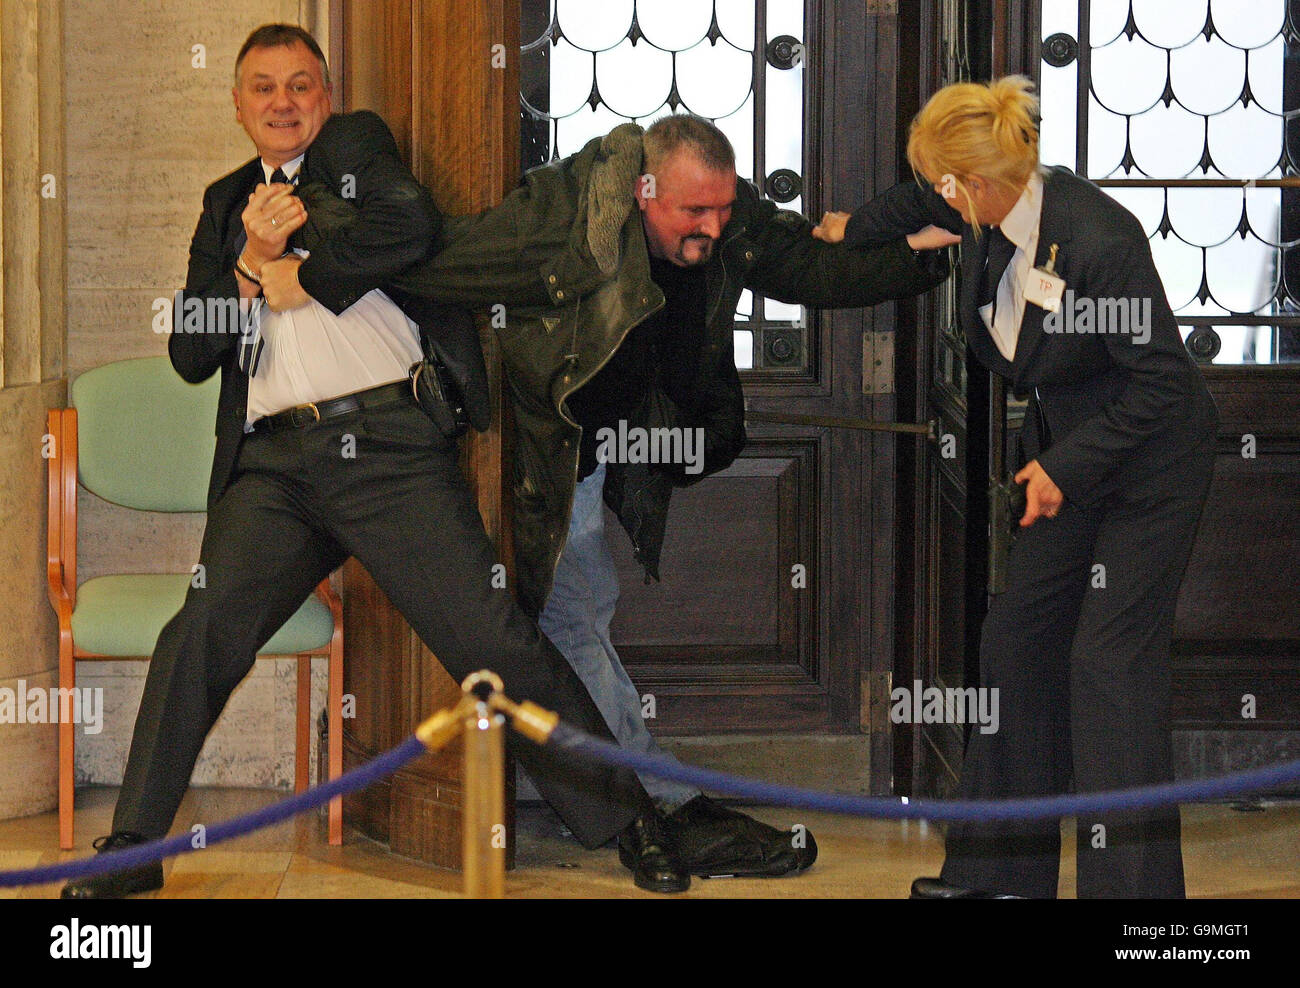 Michael stone being restrained be security staff after forcing the